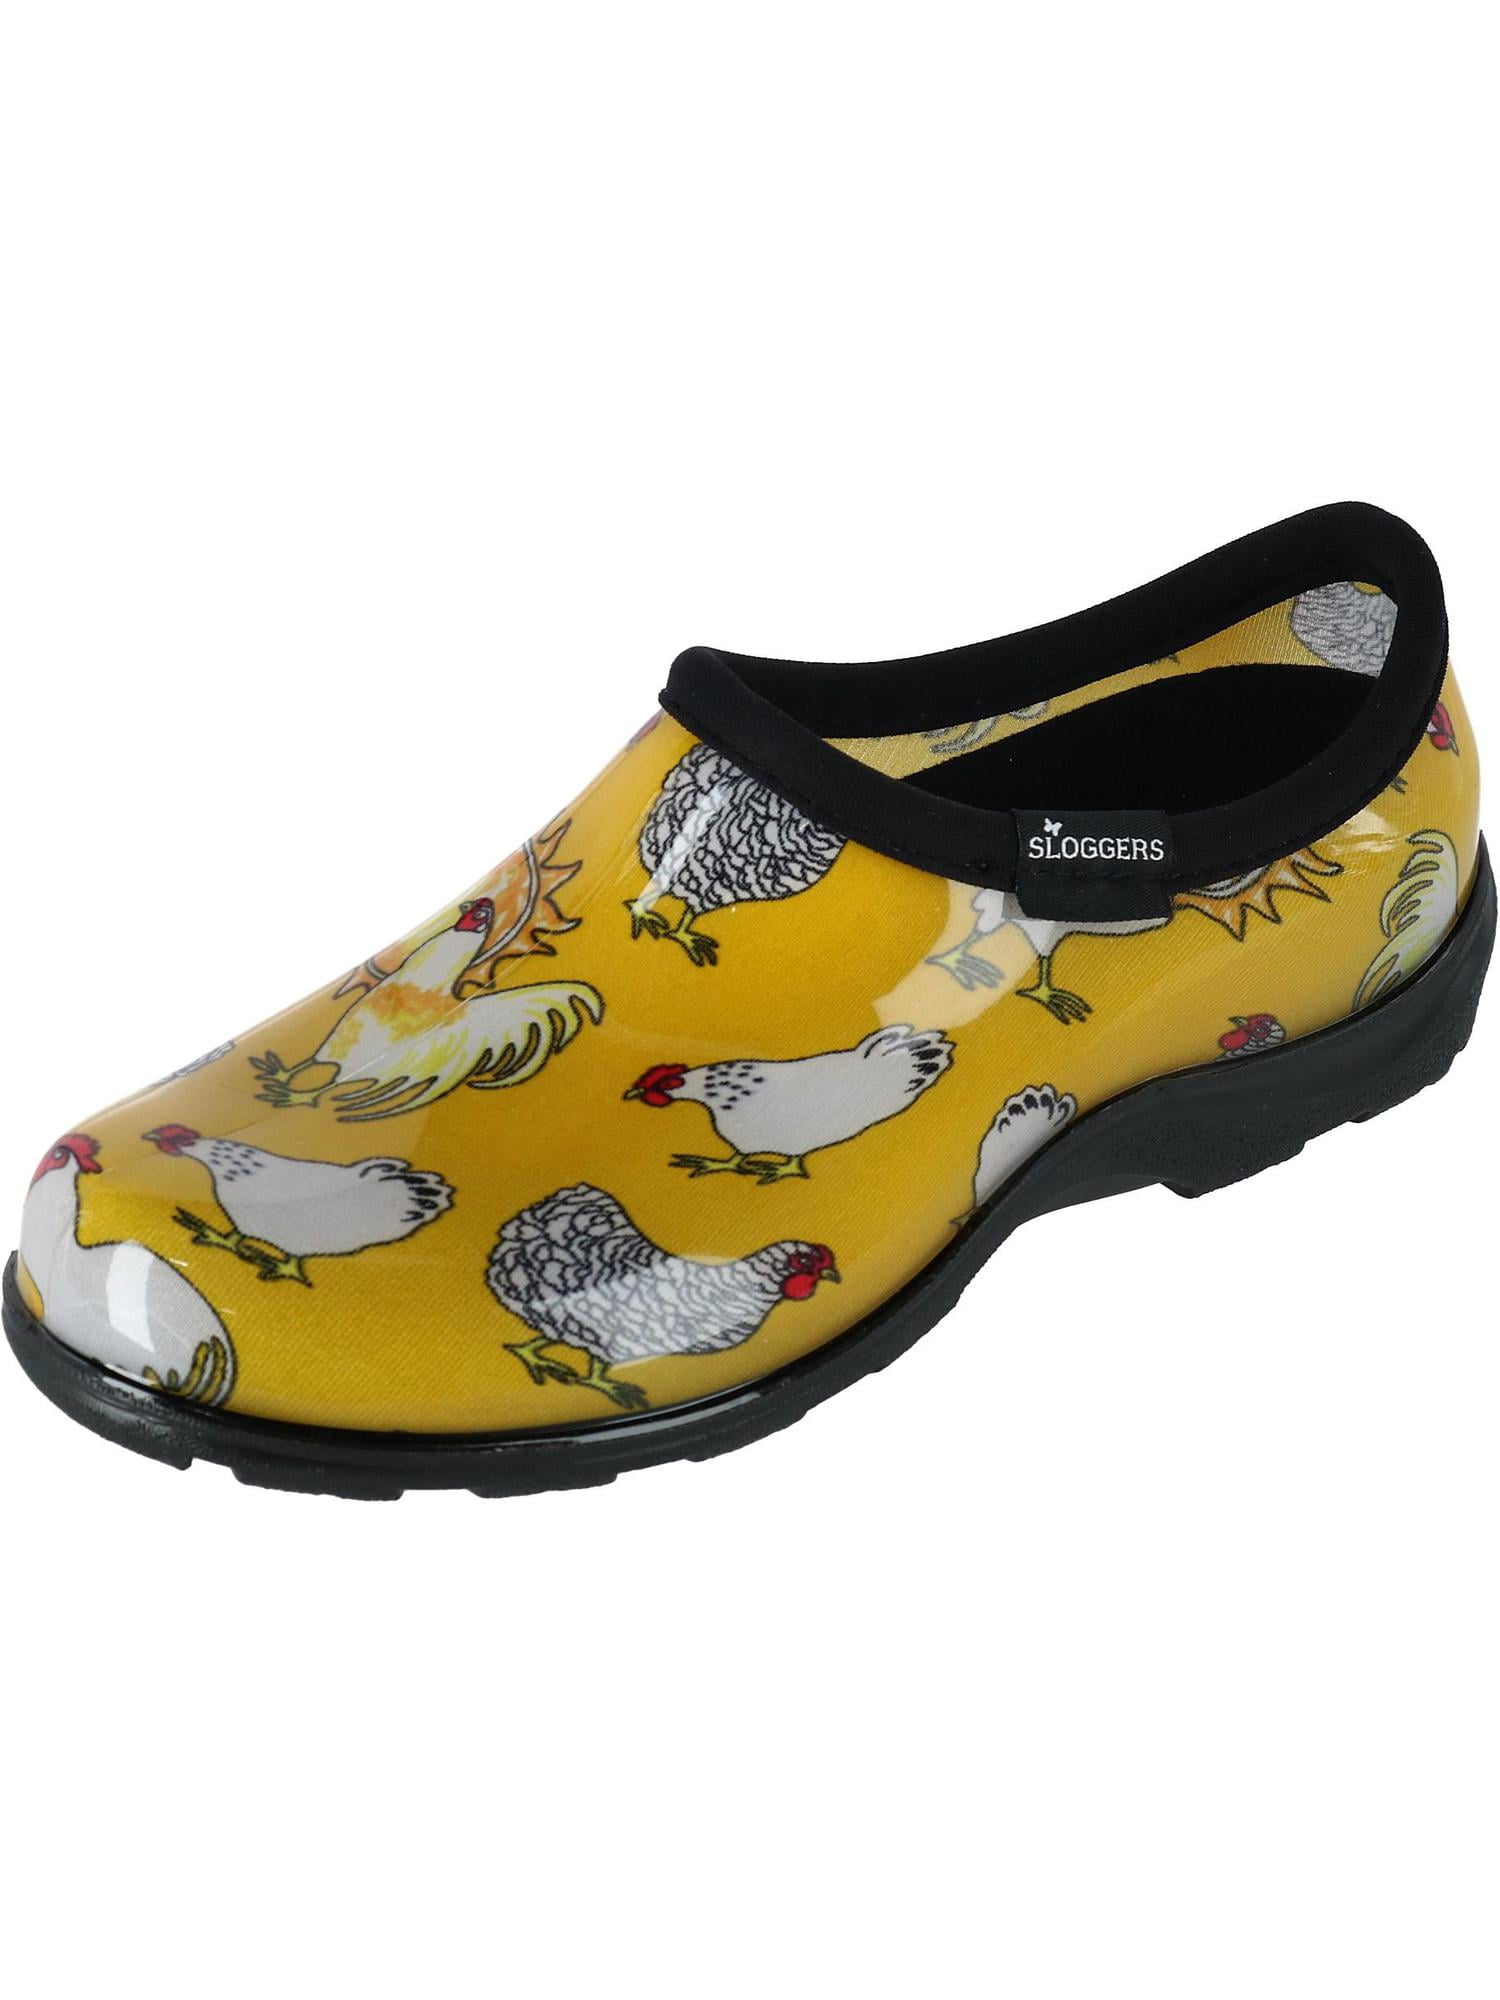 Size 9 Principle Plastics Sloggers 5116CDY09 Chicken Print Collection Womens Rain and Garden Shoe Daffodil Yellow